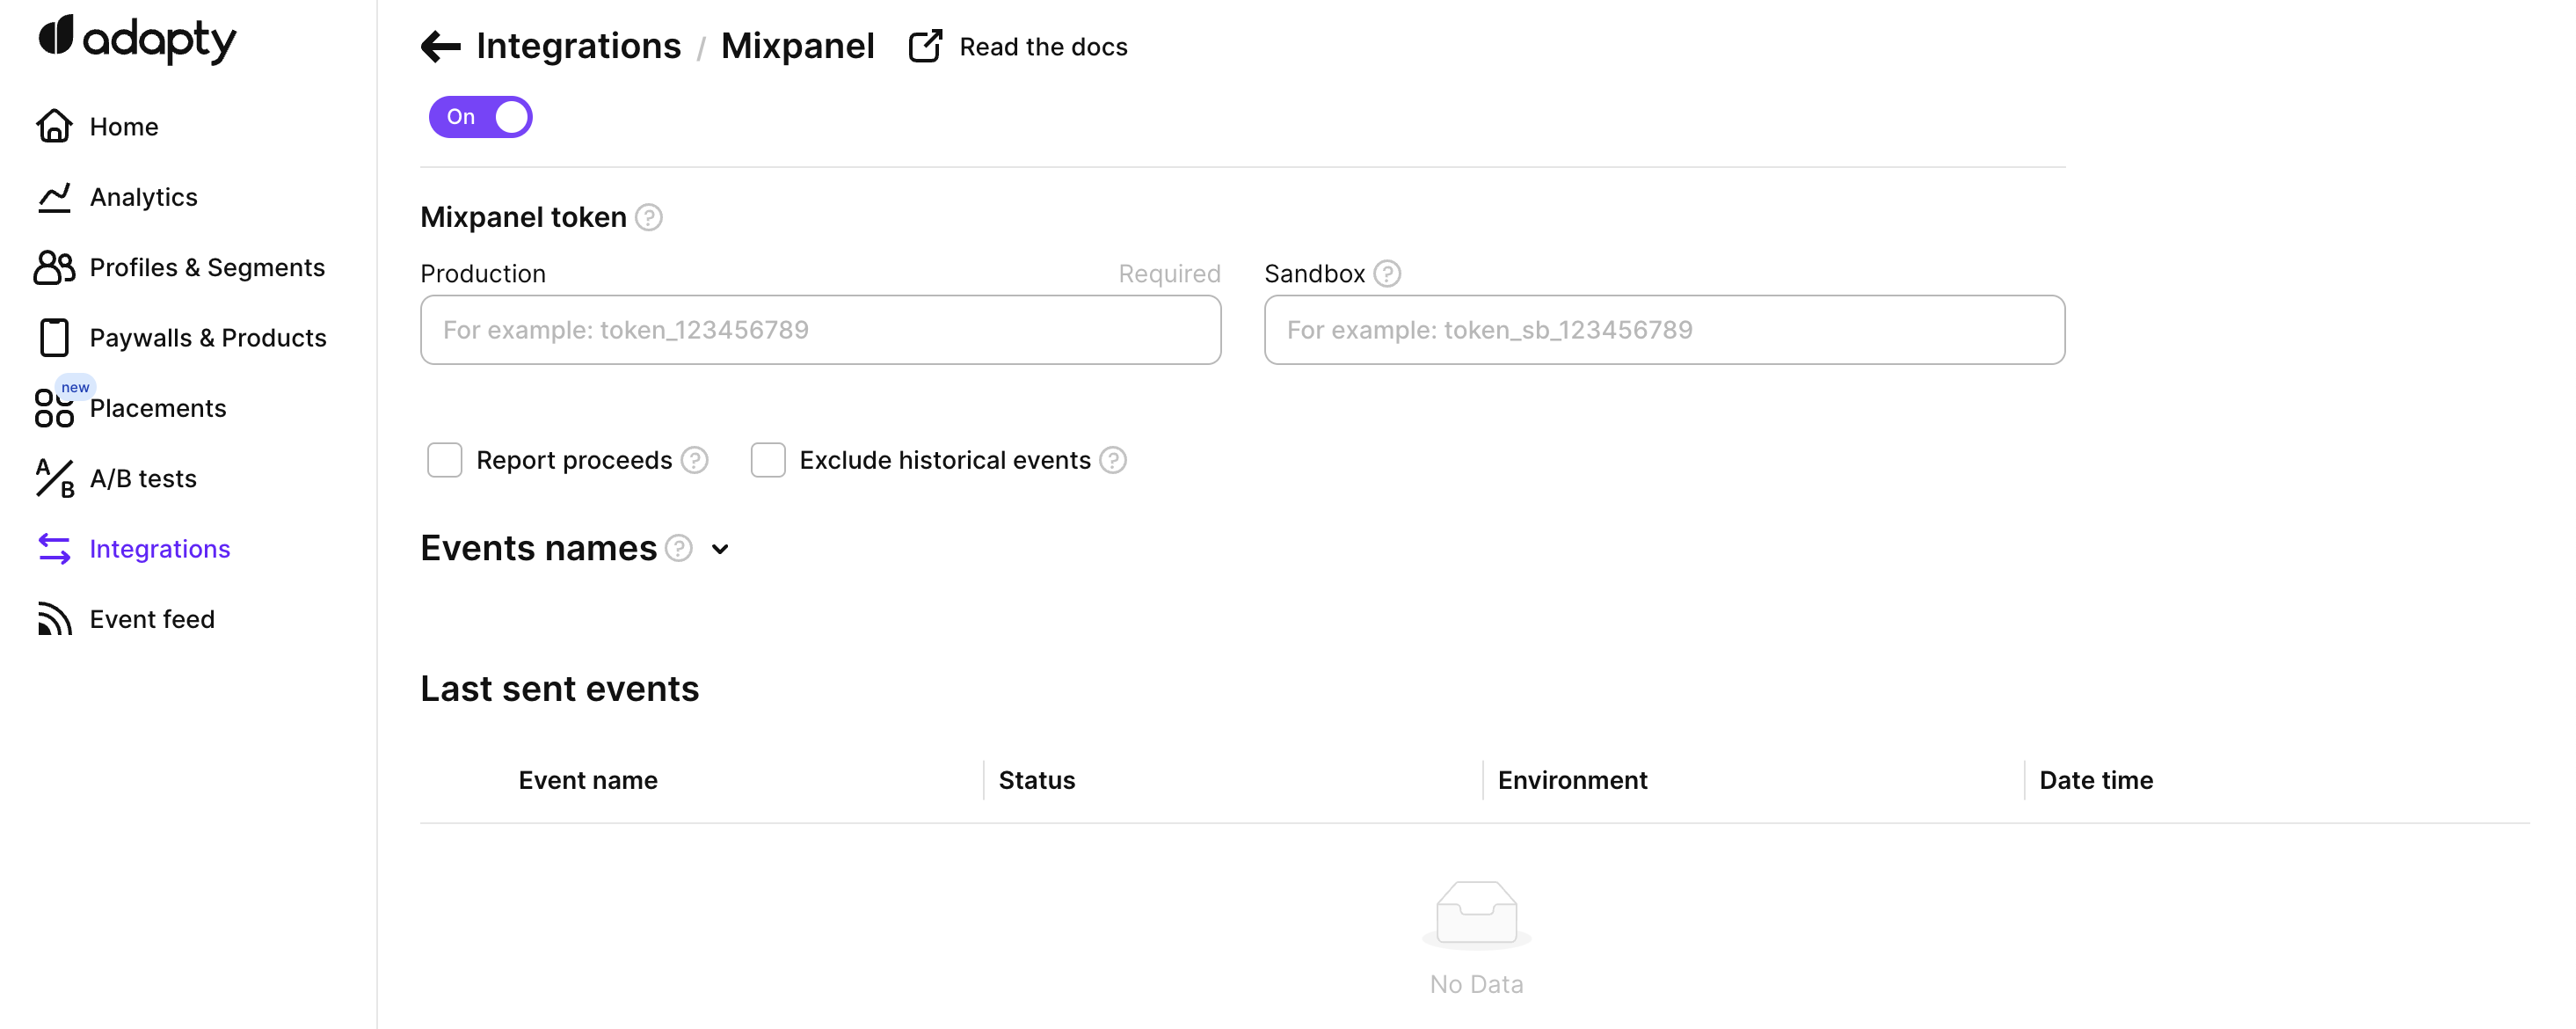 Mixpanel integration page in Adapty dashboard